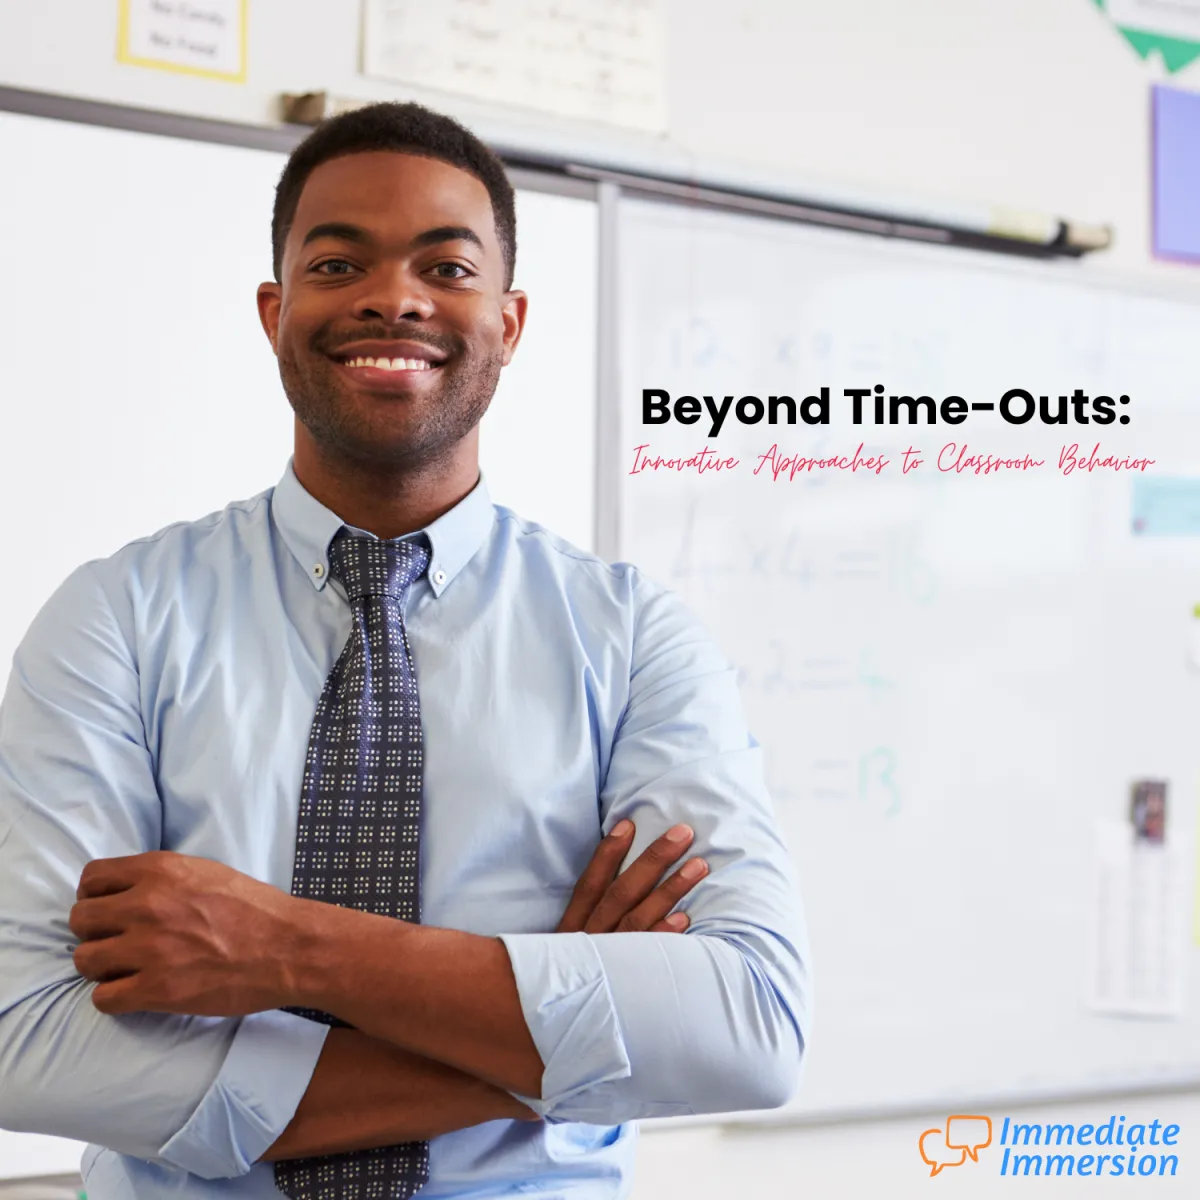 Beyond Time-Outs